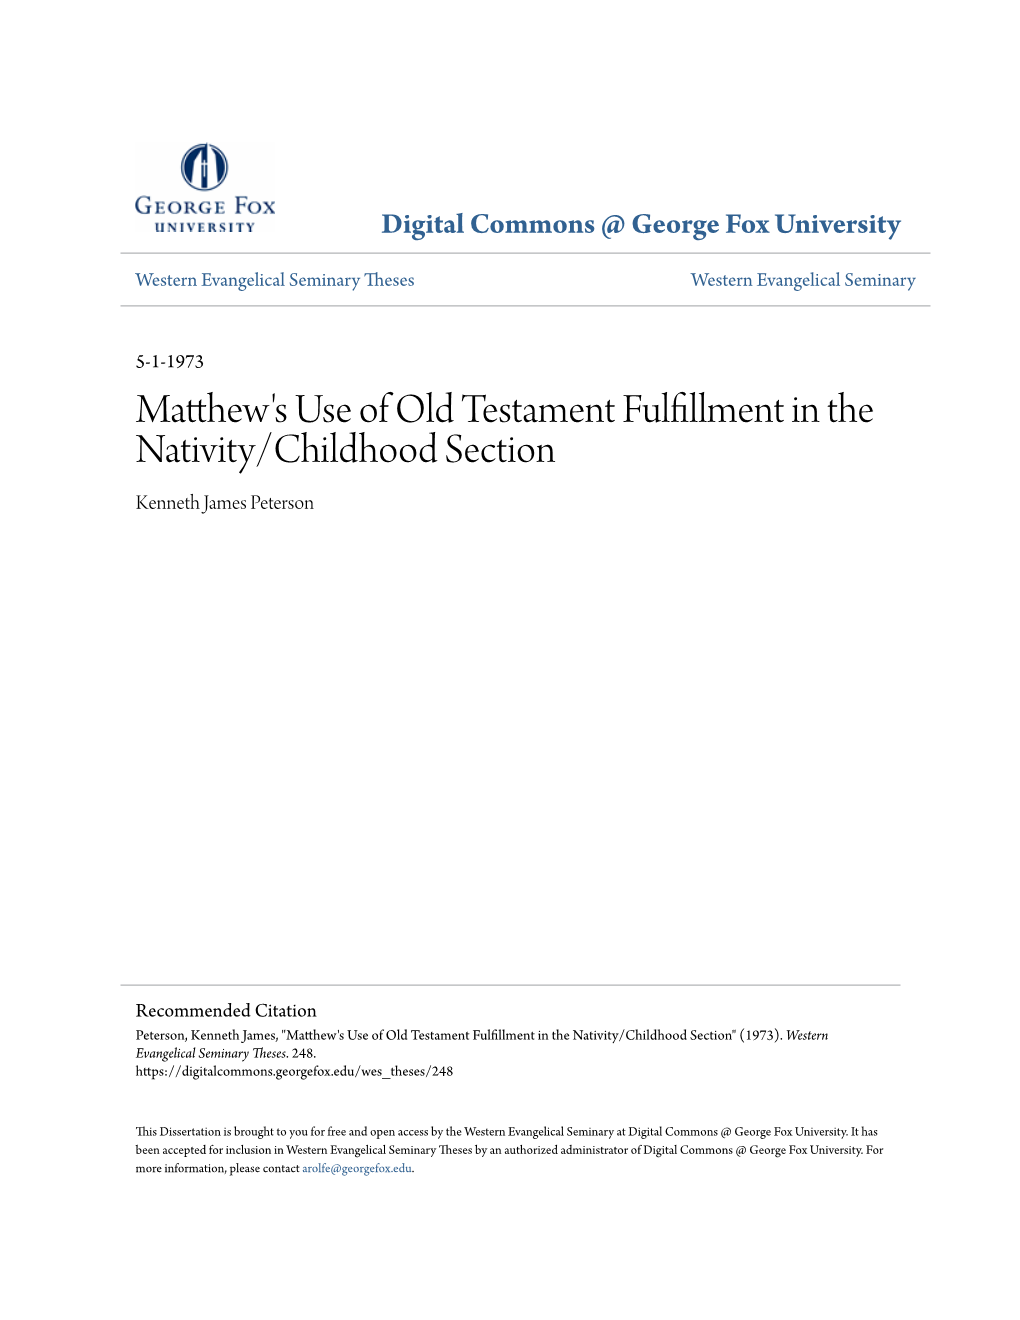 Matthew's Use of Old Testament Fulfillment in the Nativity/Childhood Section Kenneth James Peterson